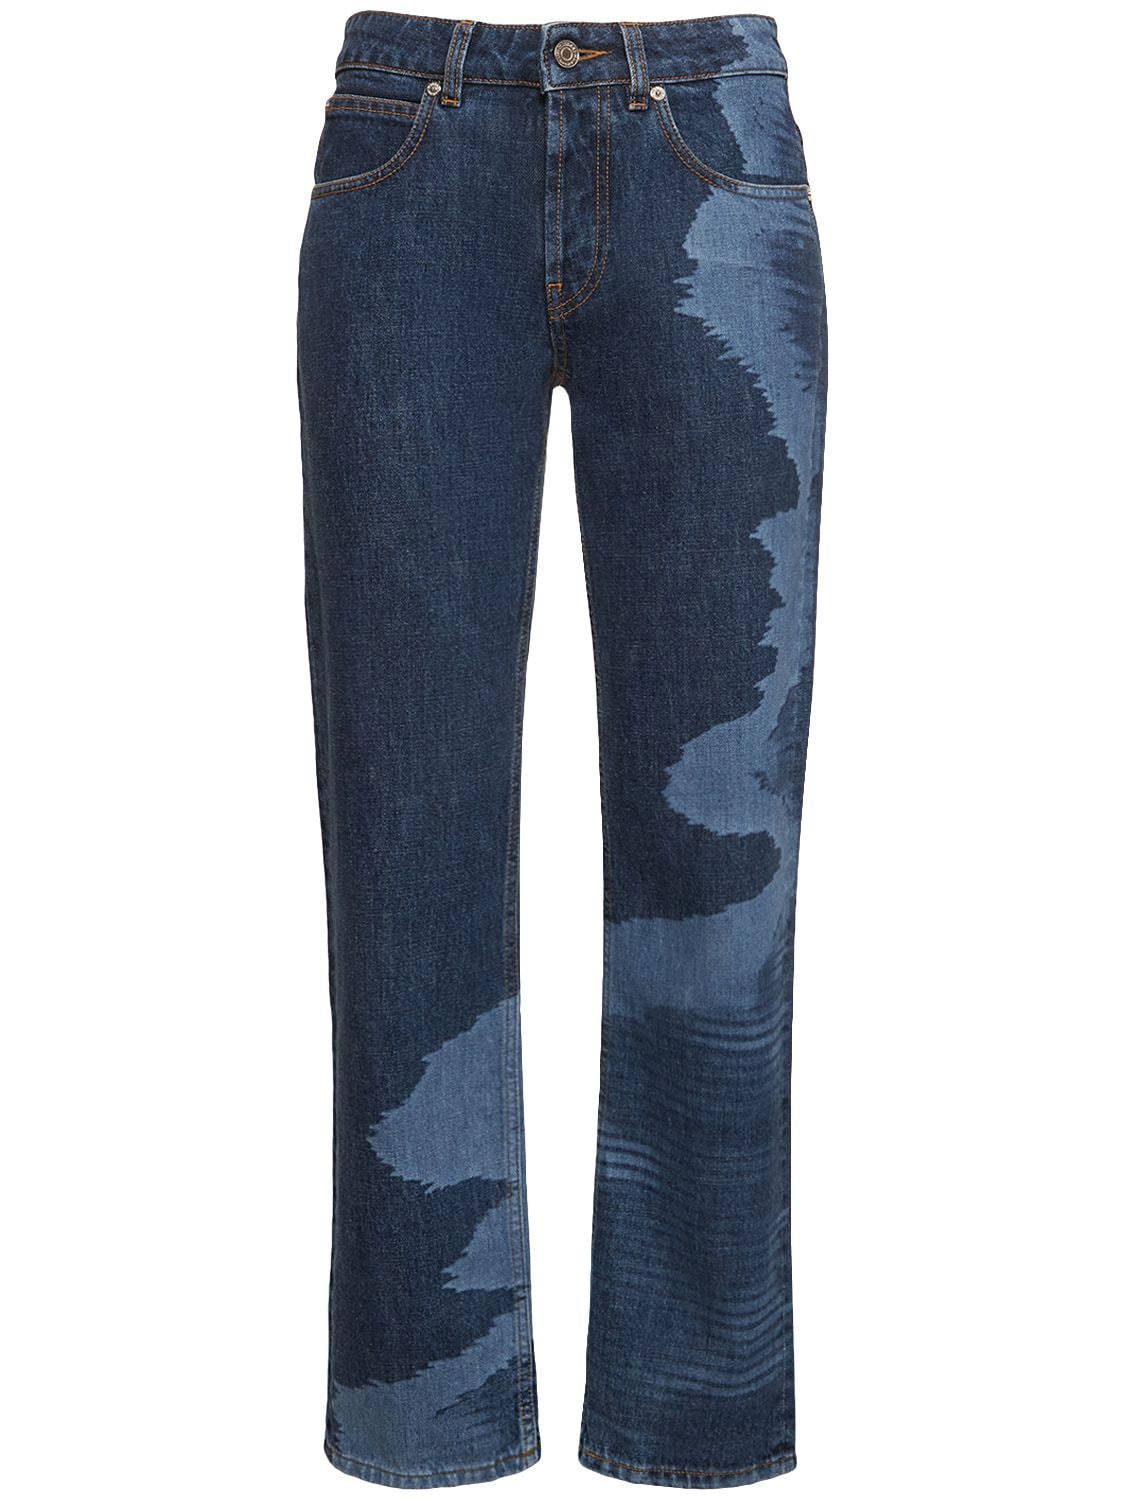 Shop Missoni Space Dyed Cotton Denim Straight Jeans In Space Dye Laser